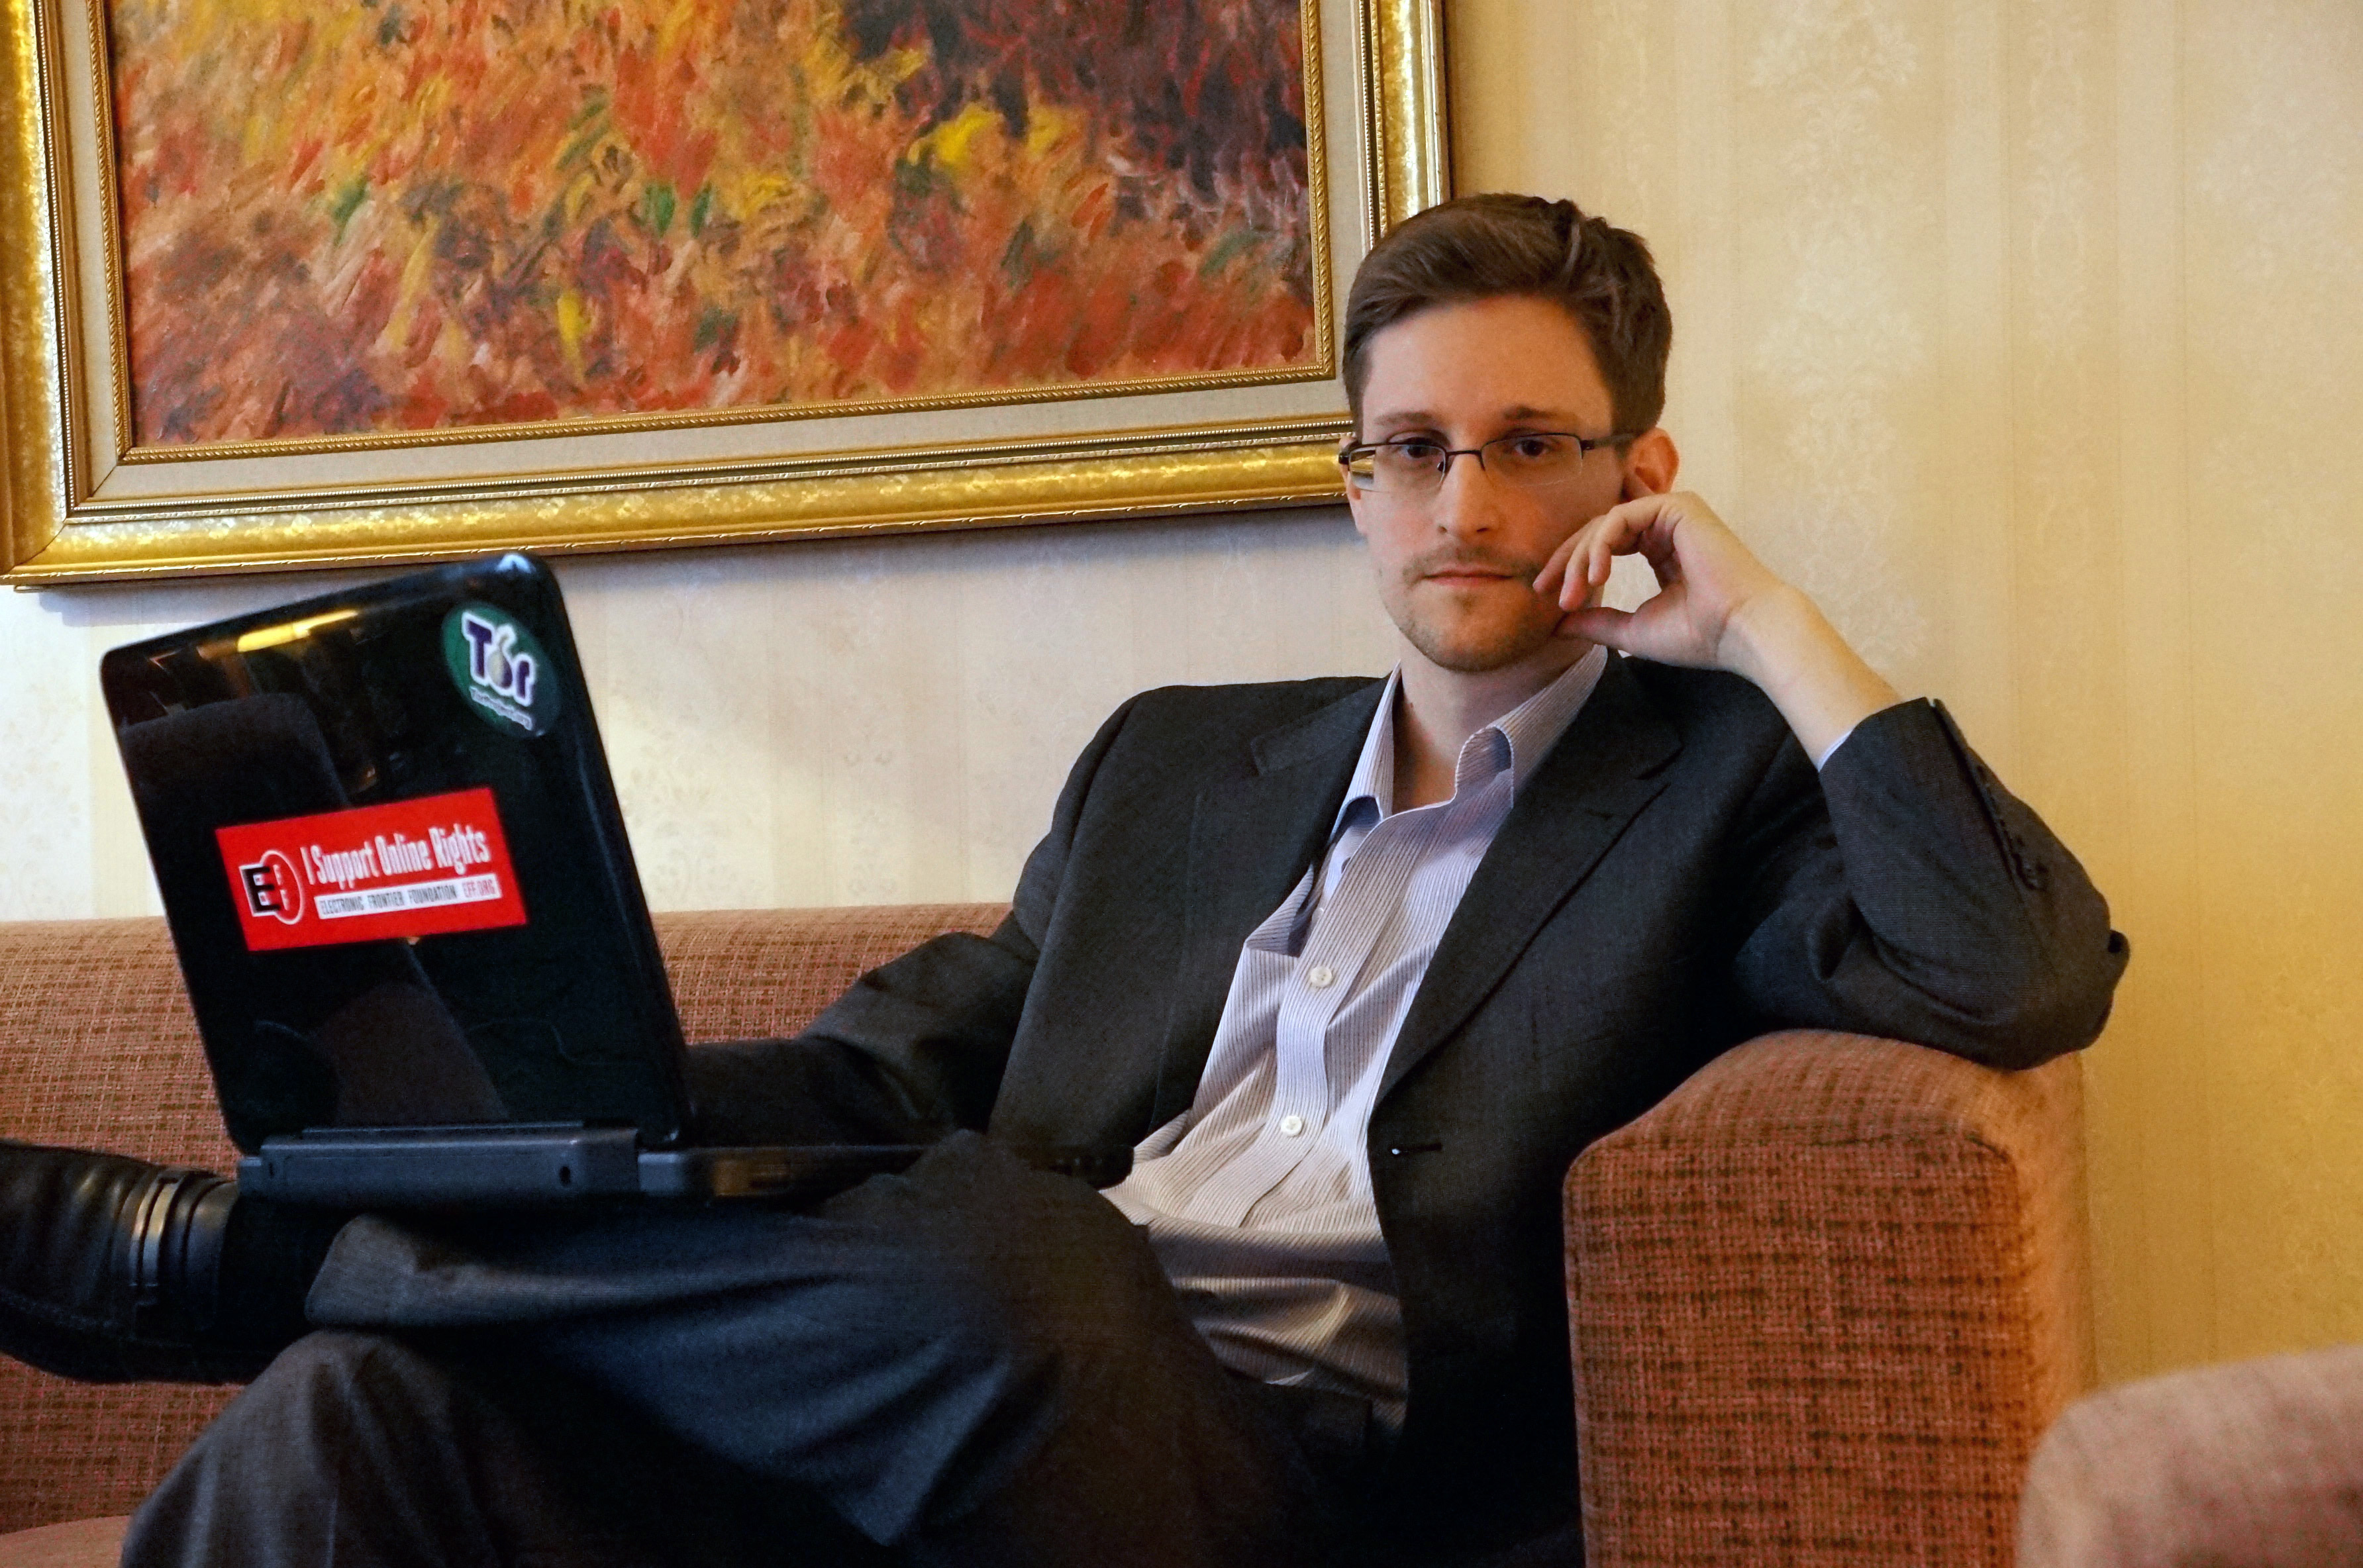 Former intelligence contractor Edward Snowden poses for a photo during an interview in an undisclosed location in December 2013 in Moscow, Russia. (Barton Gellman—Getty Images)